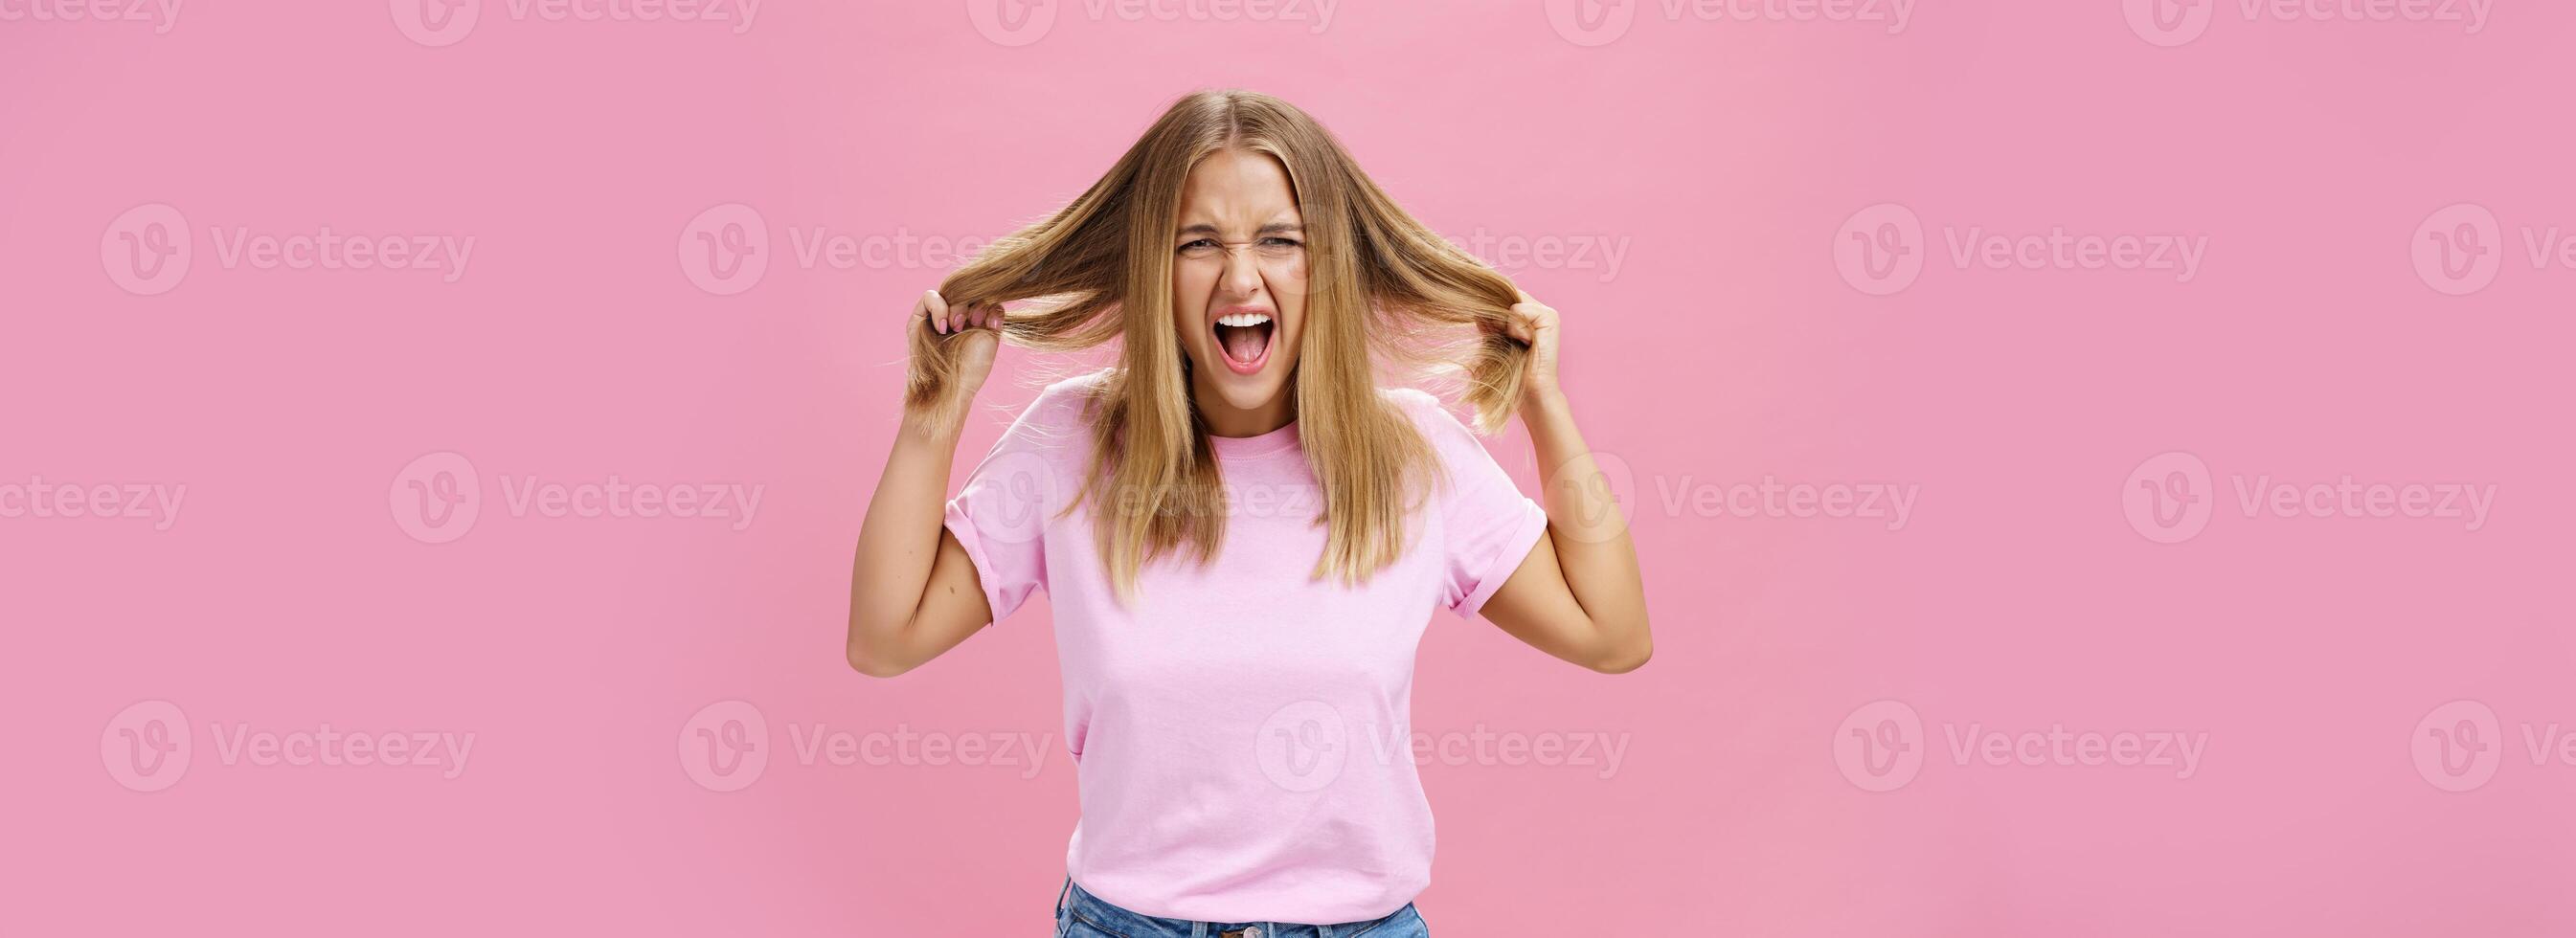 Portrait of pissed outraged and irritated woman losing temper feeling pressured screaming from distress pulling hair out of head standing annoyed over pink background fed up doing haircut every day photo